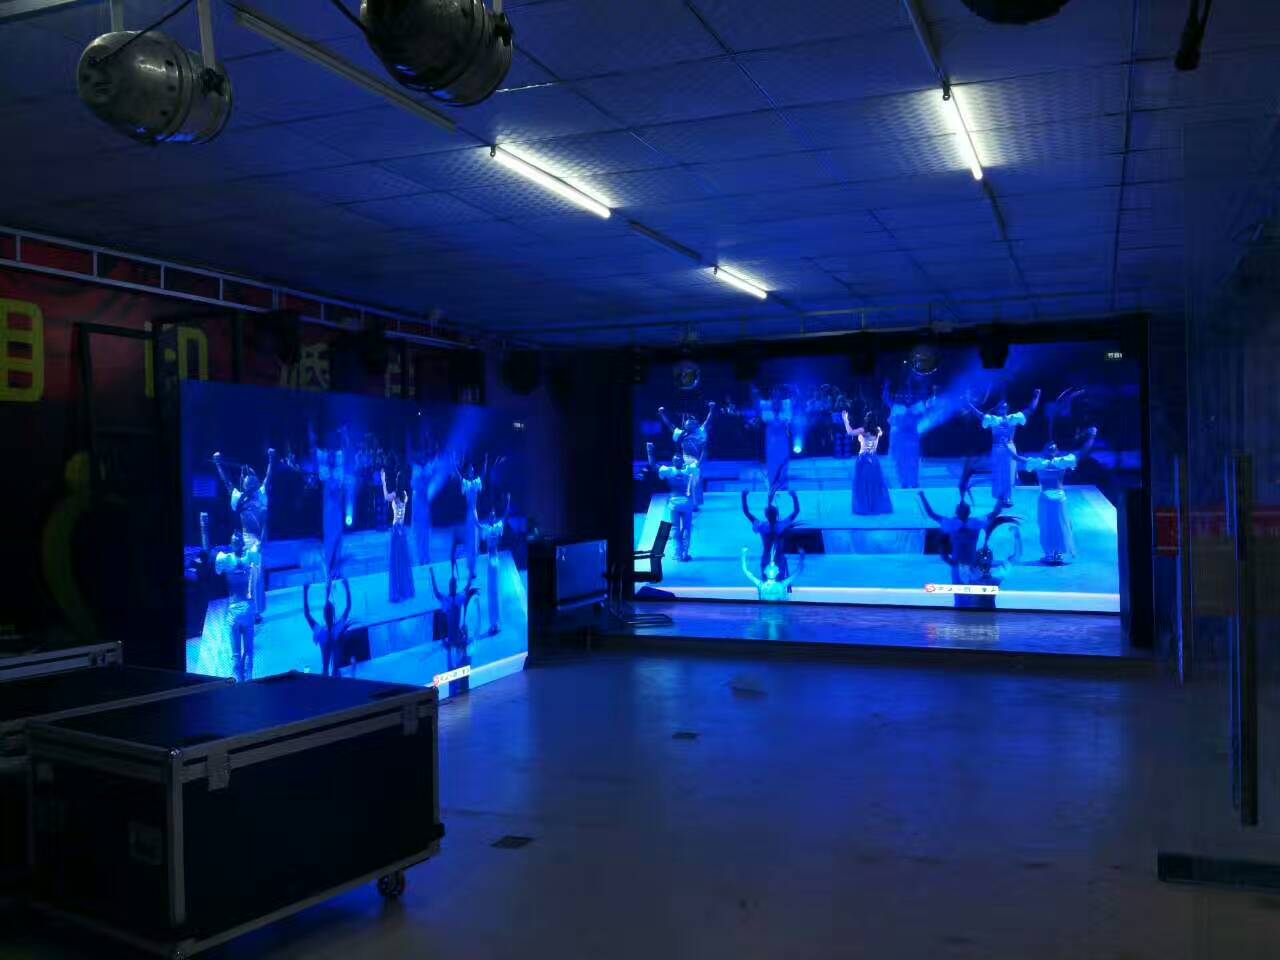 Heart color wedding P3.91 pressure leasing LED full color screen installation is completed